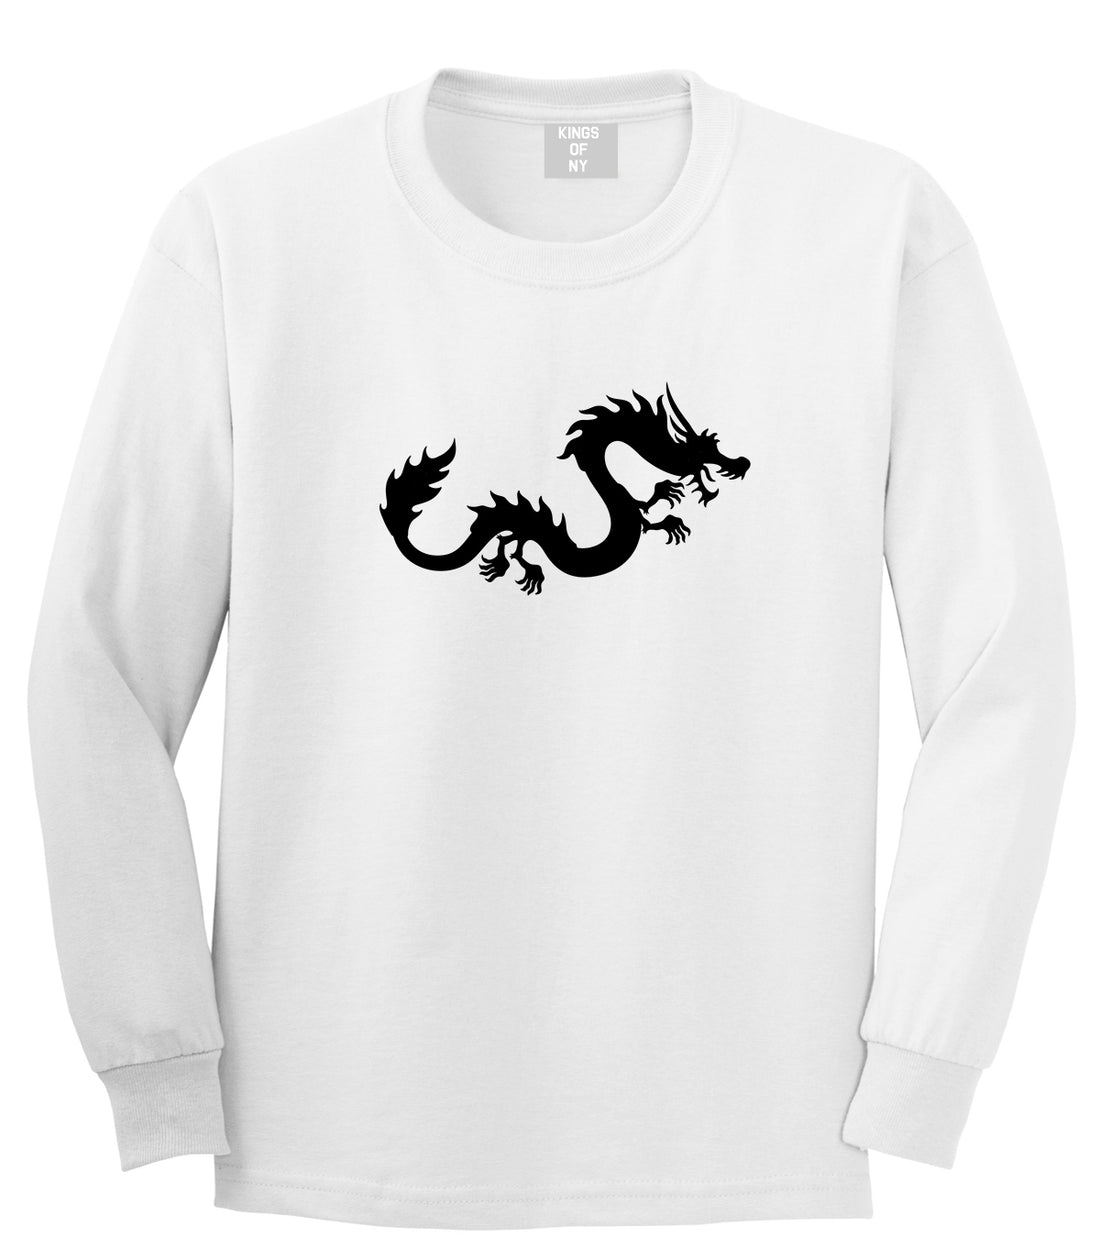 Chinese Dragon White Long Sleeve T-Shirt by Kings Of NY